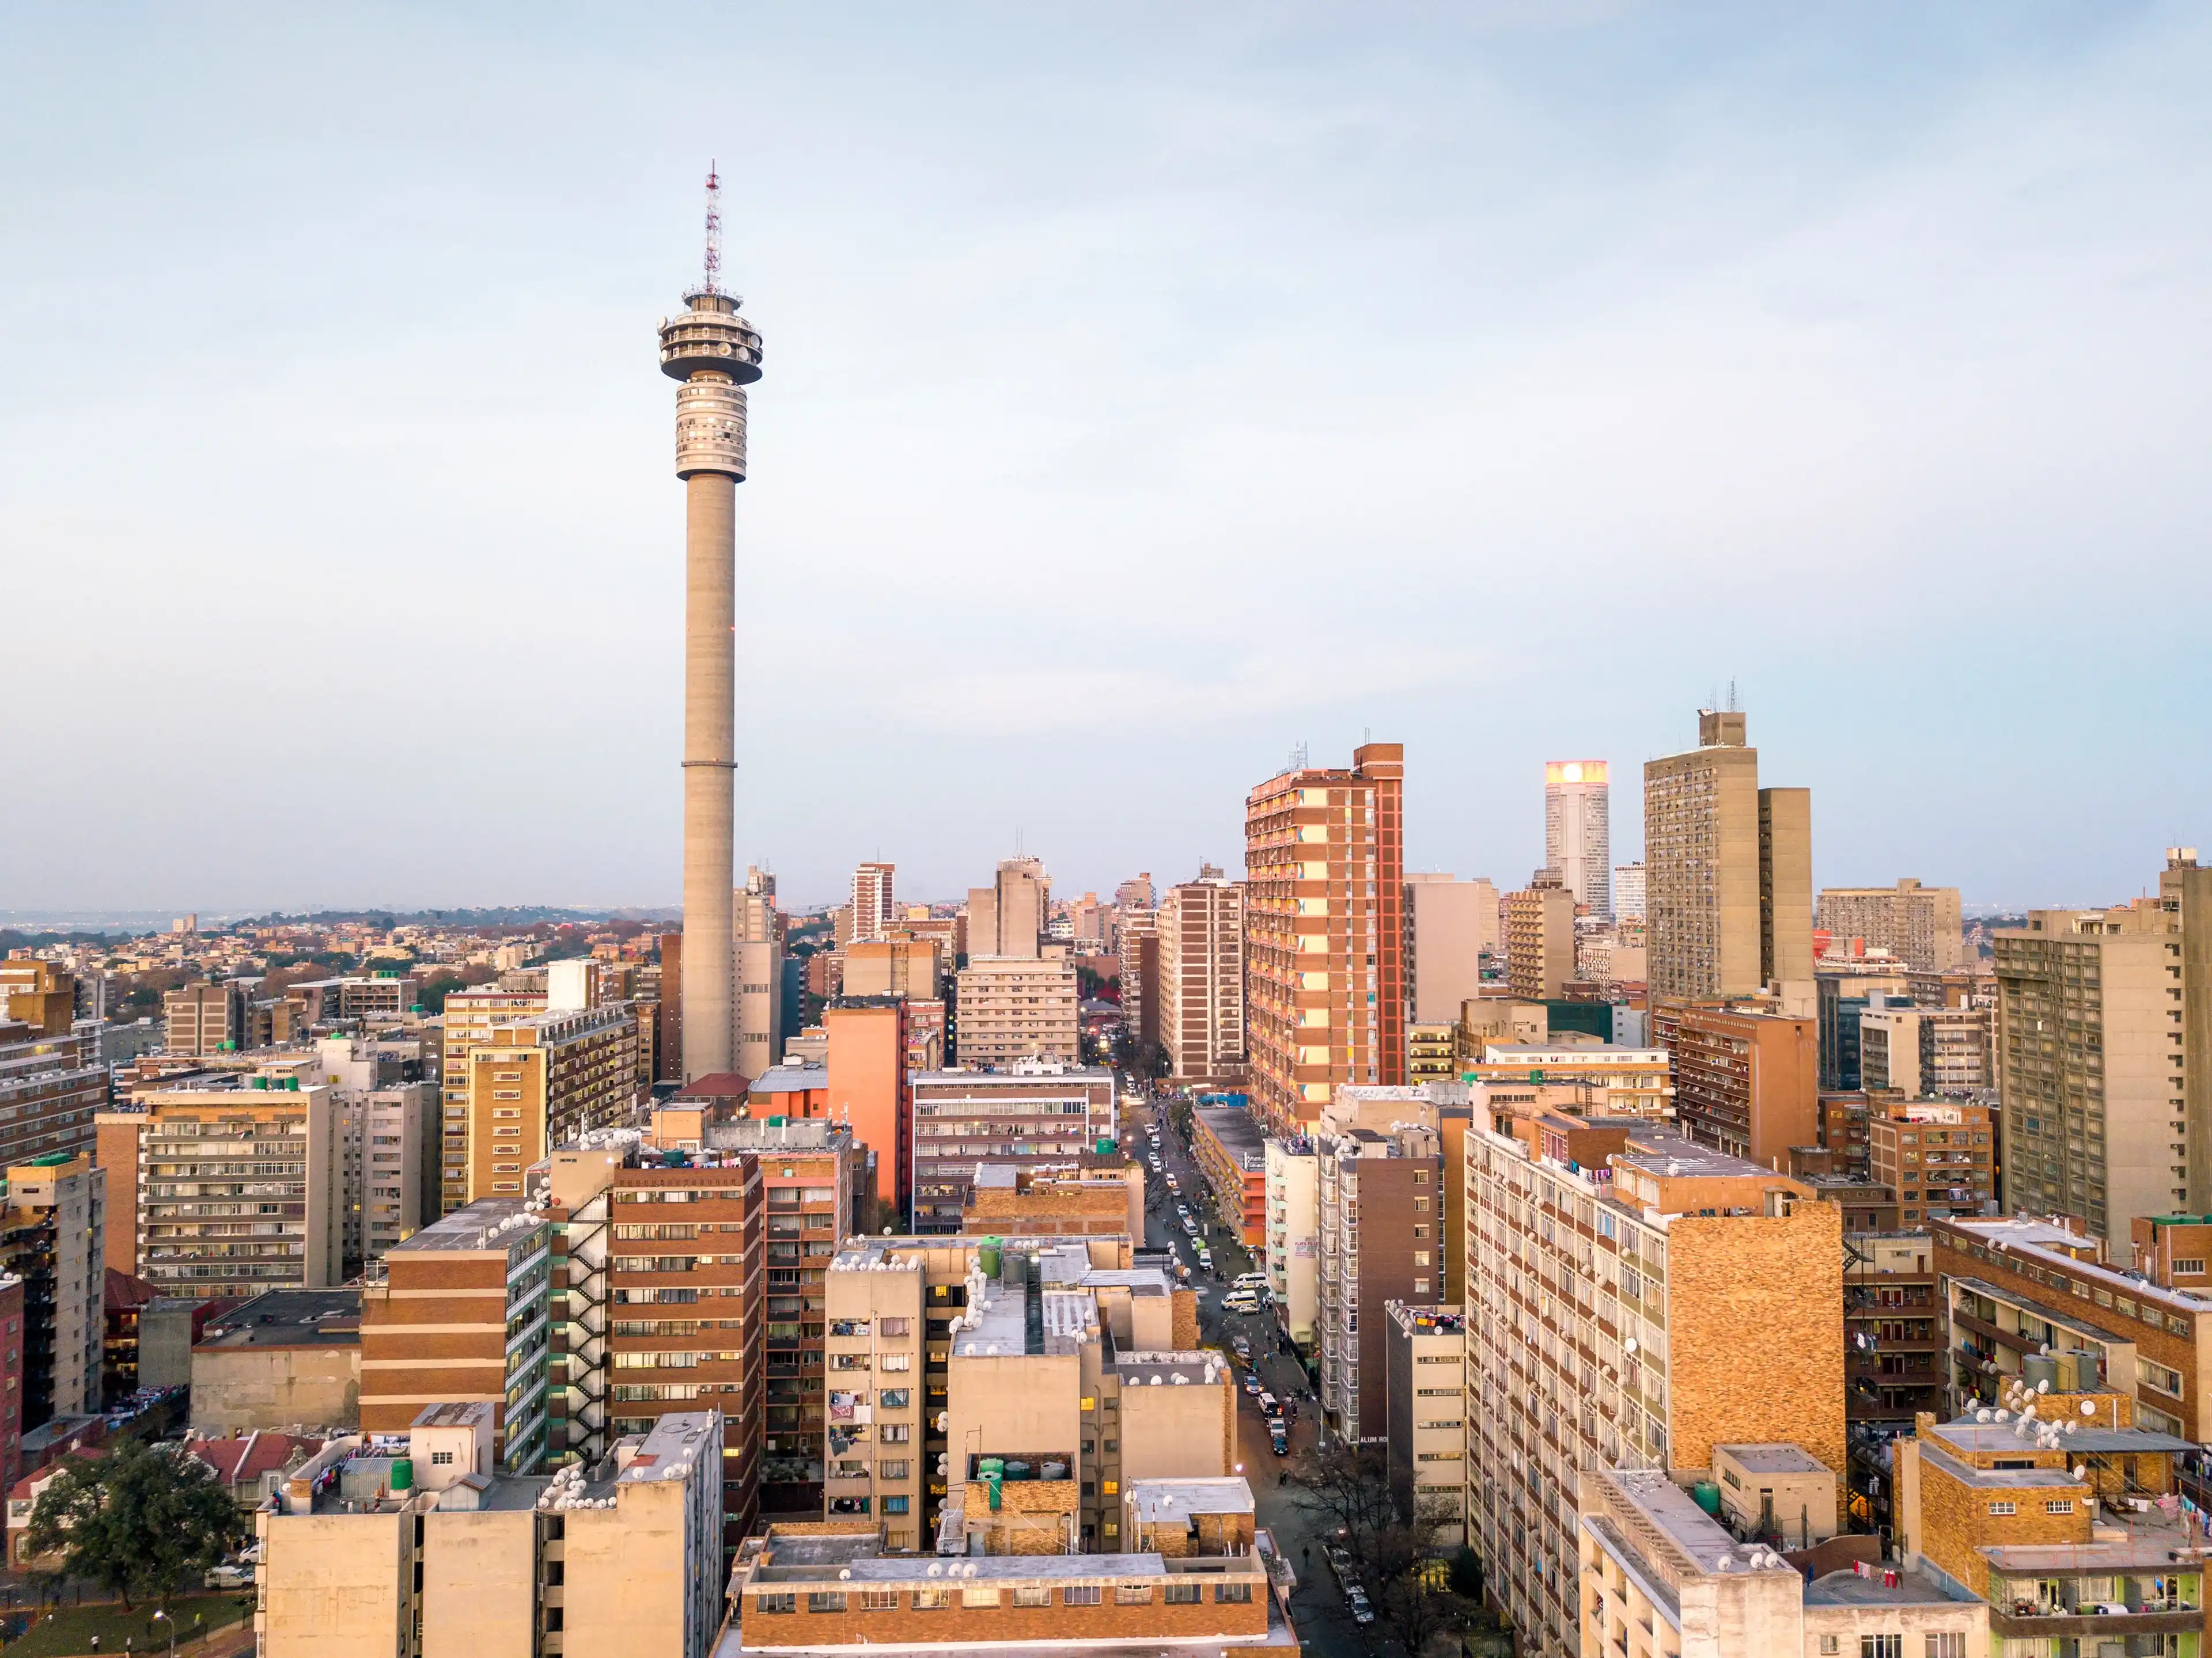 Skyscrapers in downtown of Johannesburg, South Africa